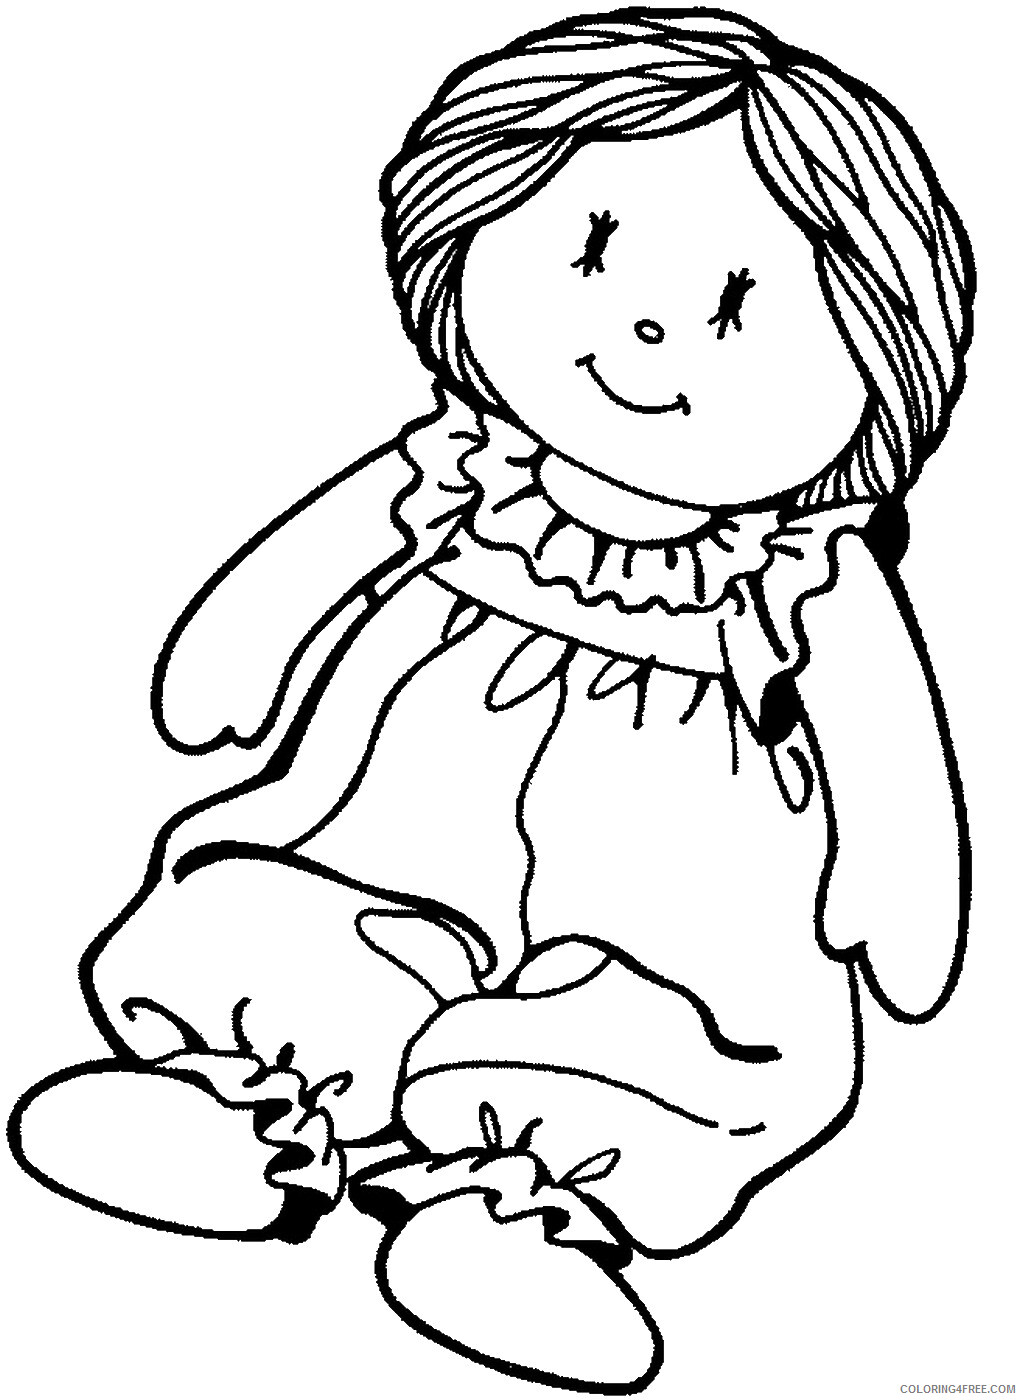 Doll Coloring Pages for Girls dolls_34 Printable 2021 0383 Coloring4free